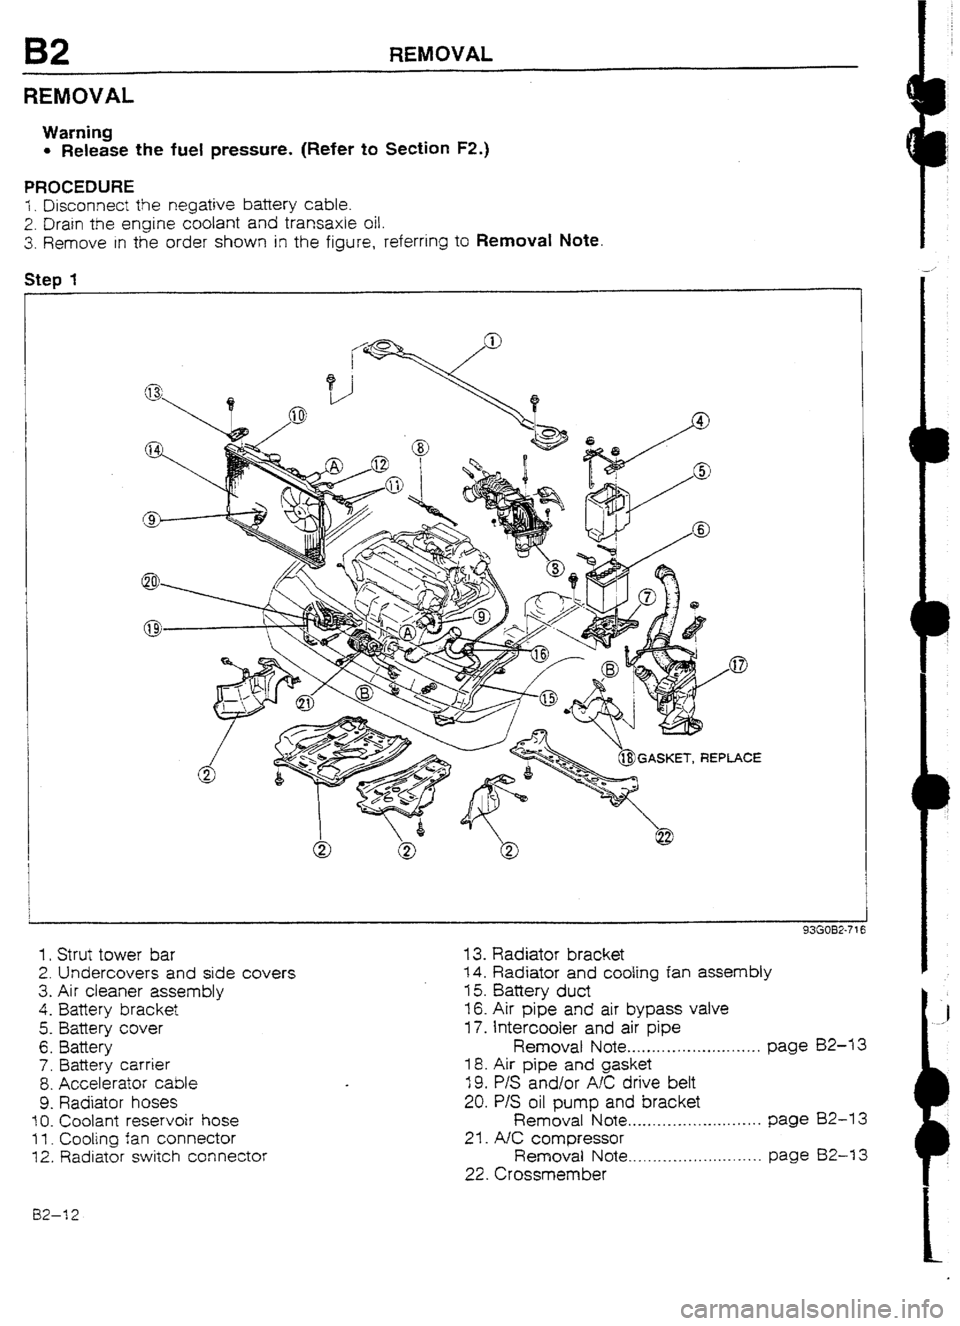 MAZDA 232 1990  Workshop Manual Suplement B2 REMOVAL 
REMOVAL 
Warning 
l Release the fuel pressure. (Refer to Section FZ.) 
PROCEDURE 
i. Disconnect the negative battery cable. 
2. Drain the engine coolant and transaxle oil. 
3. Remove in th